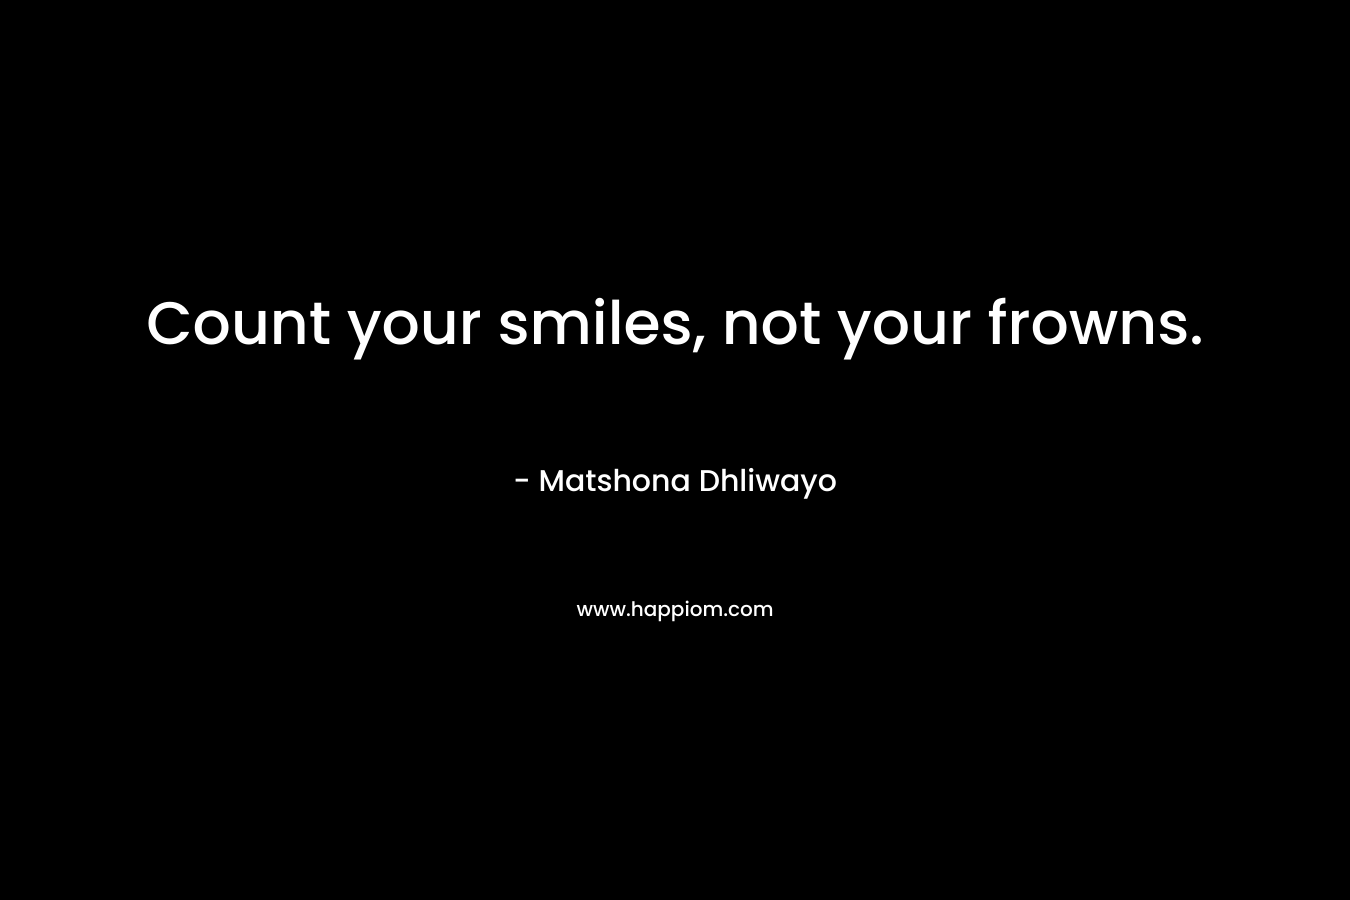 Count your smiles, not your frowns.